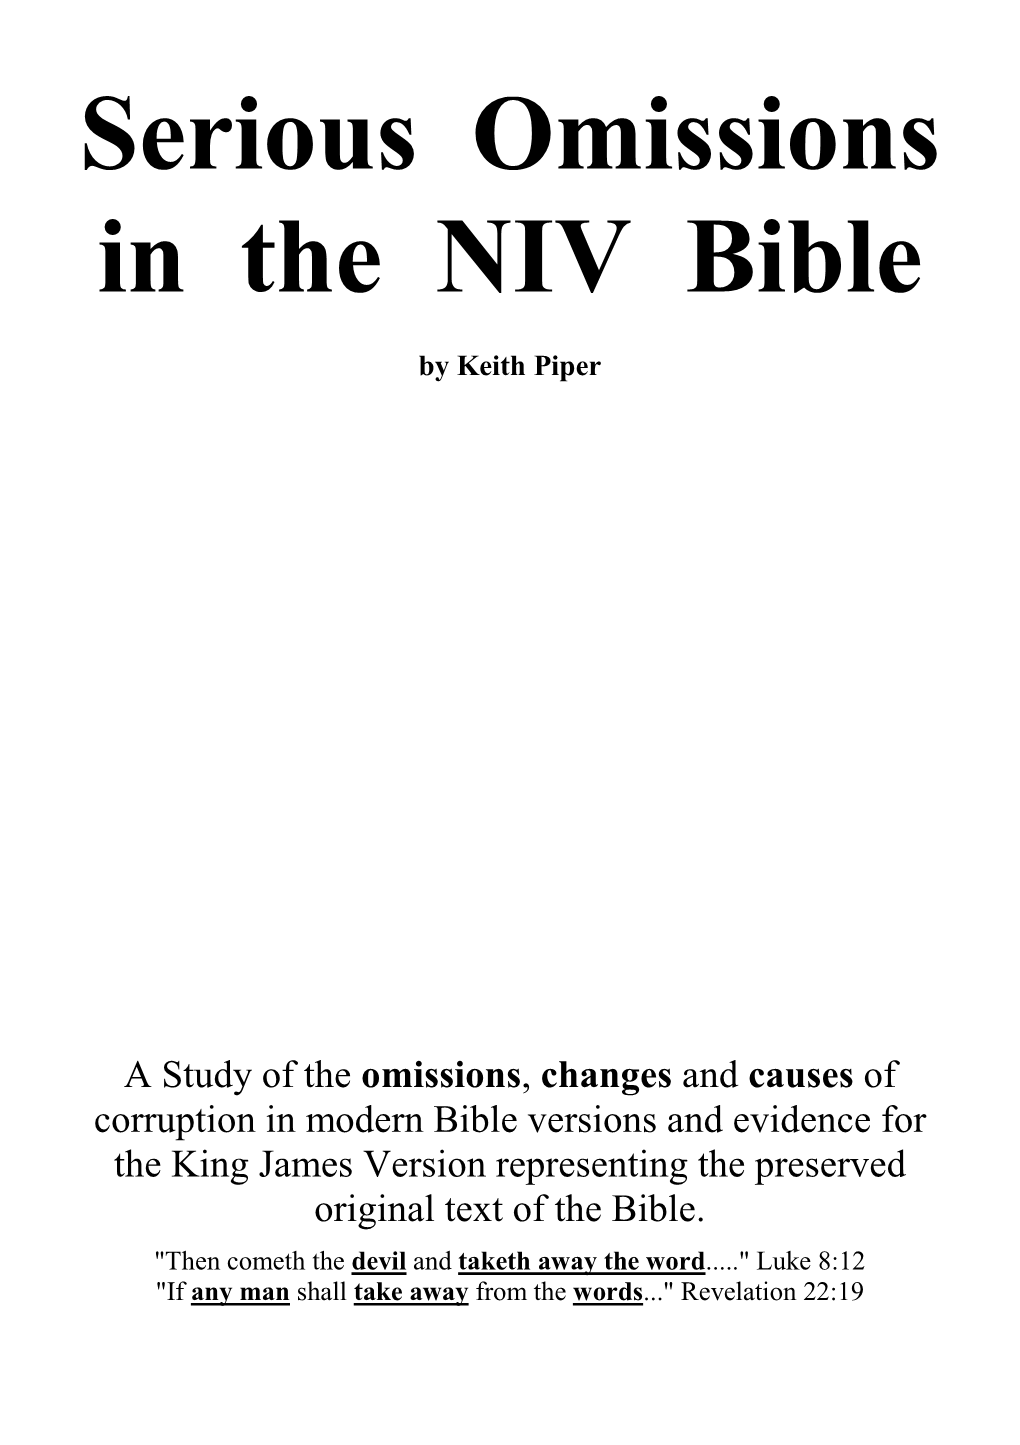 Serious Omissions in the NIV Bible